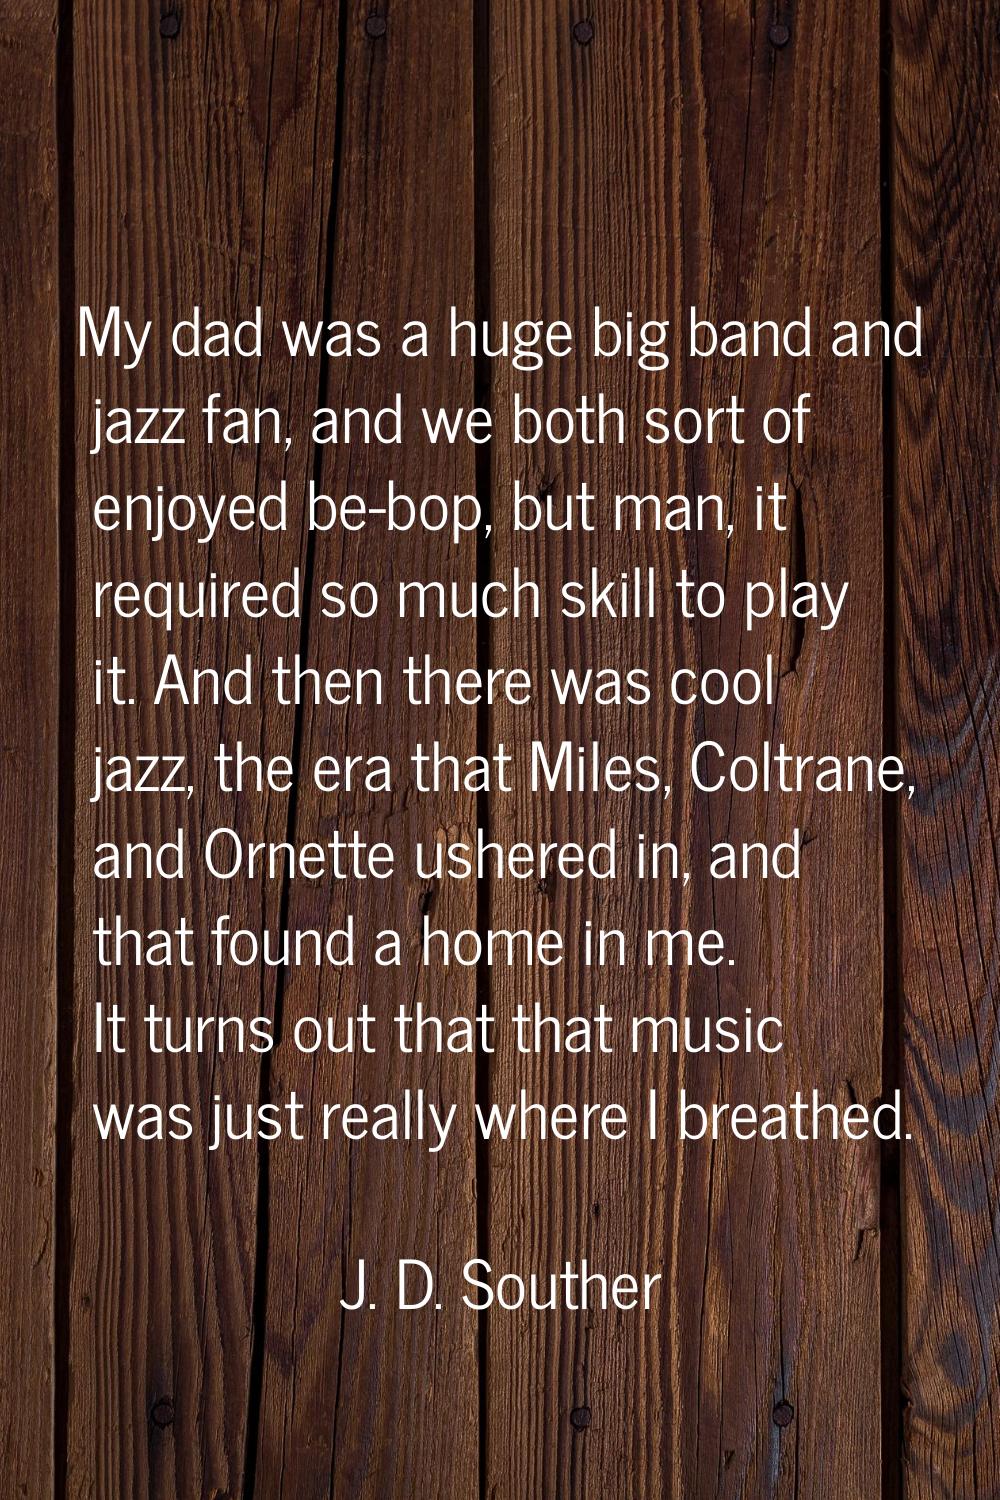 My dad was a huge big band and jazz fan, and we both sort of enjoyed be-bop, but man, it required s